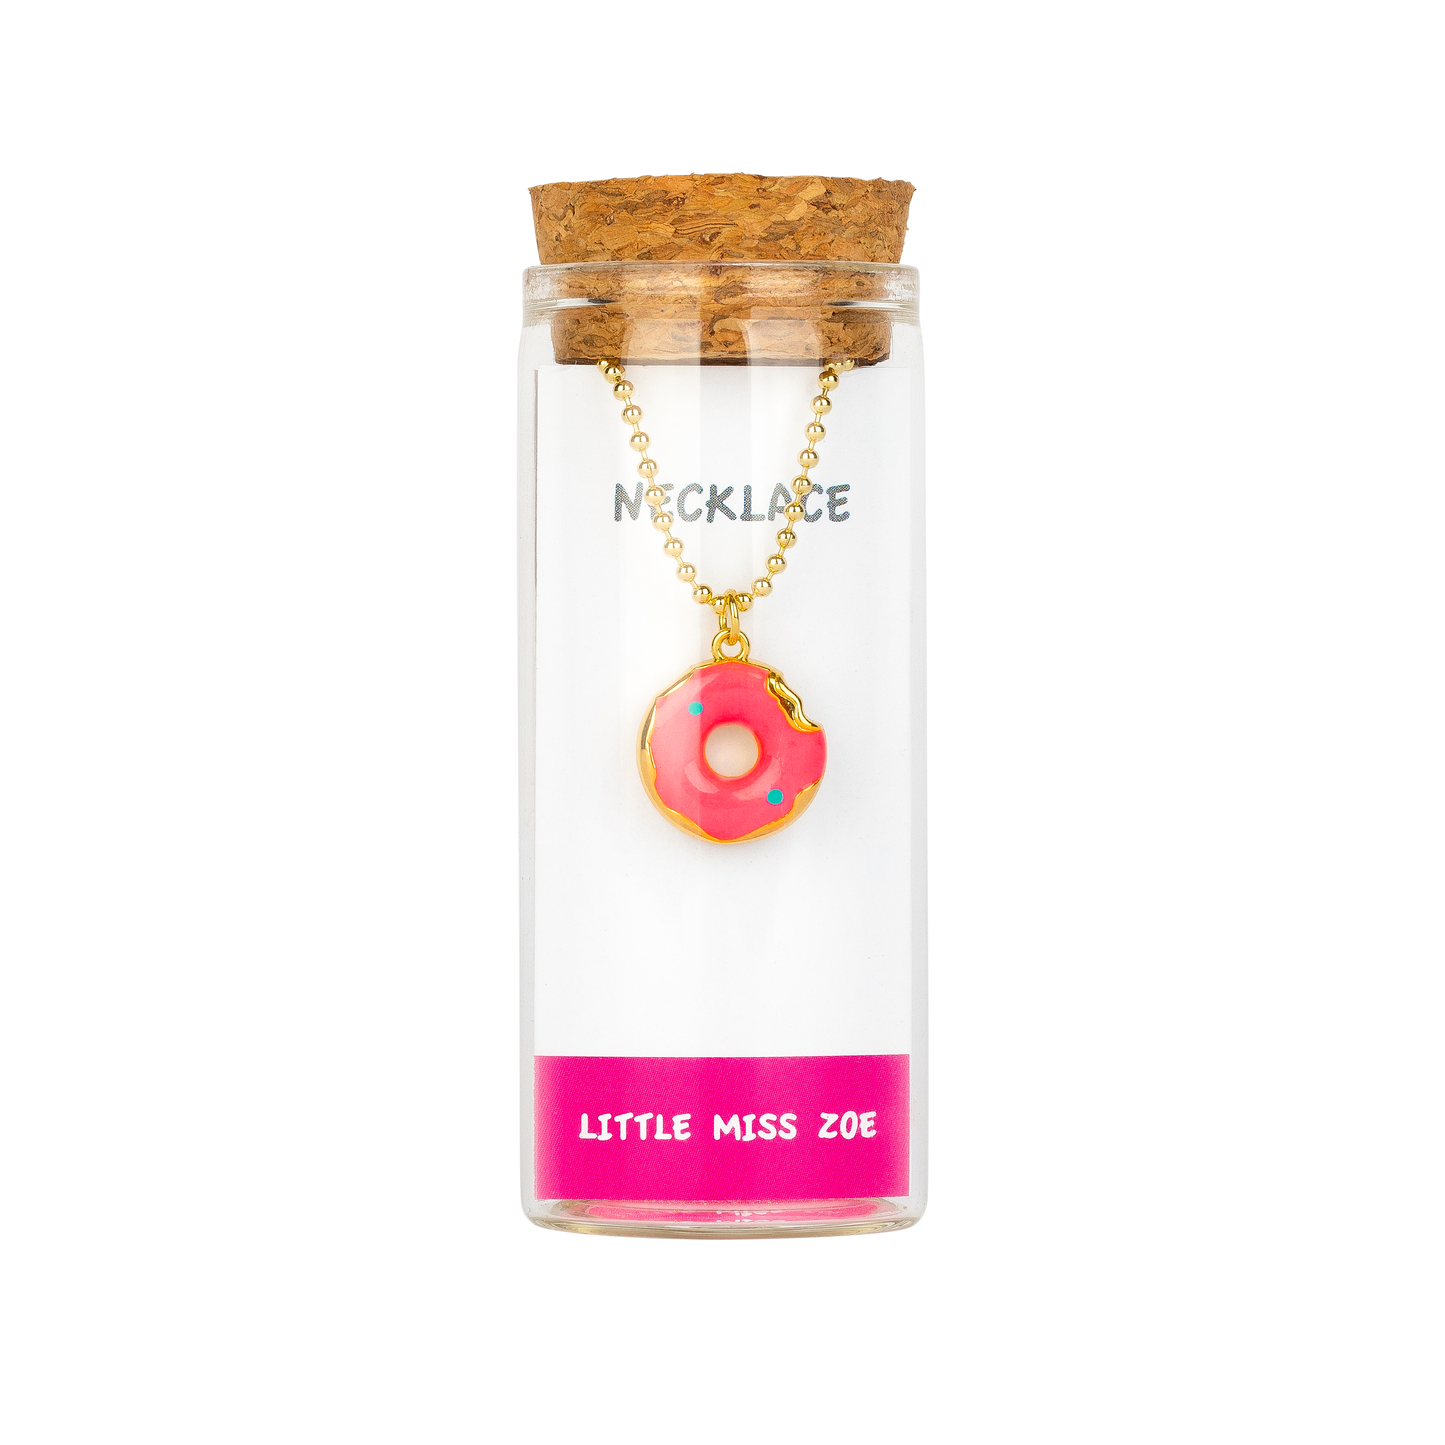 Donut Necklace in a Bottle